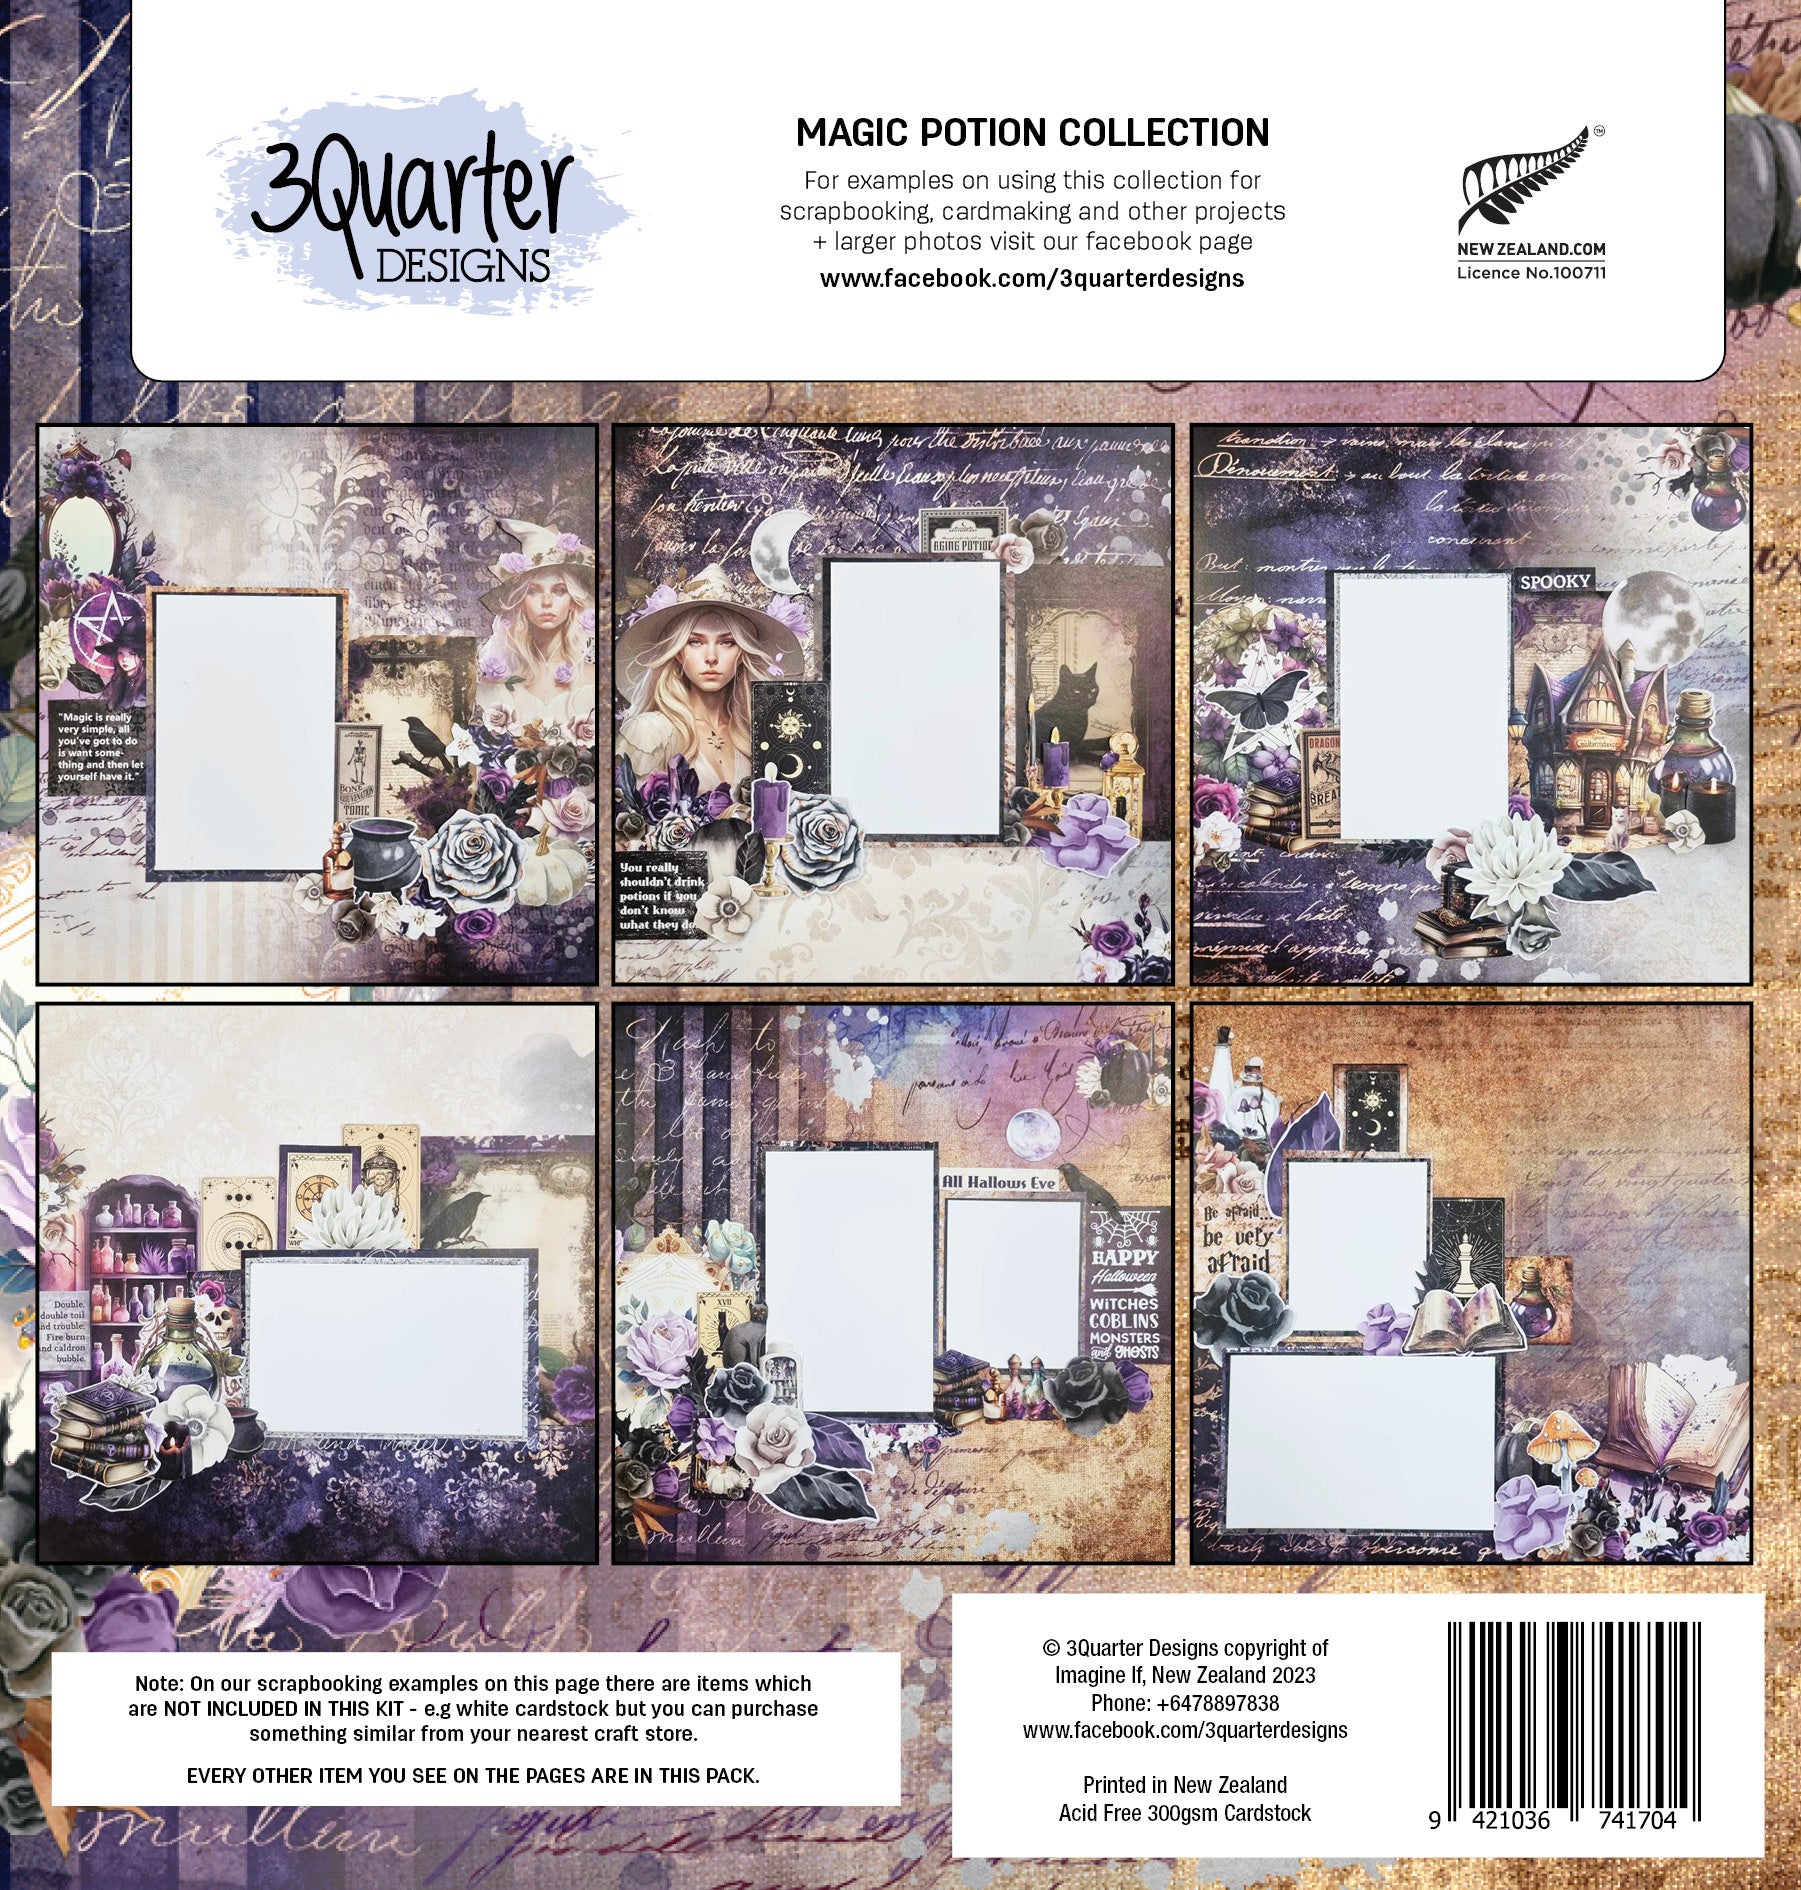 Magic Potion 12x12 Collection Pack